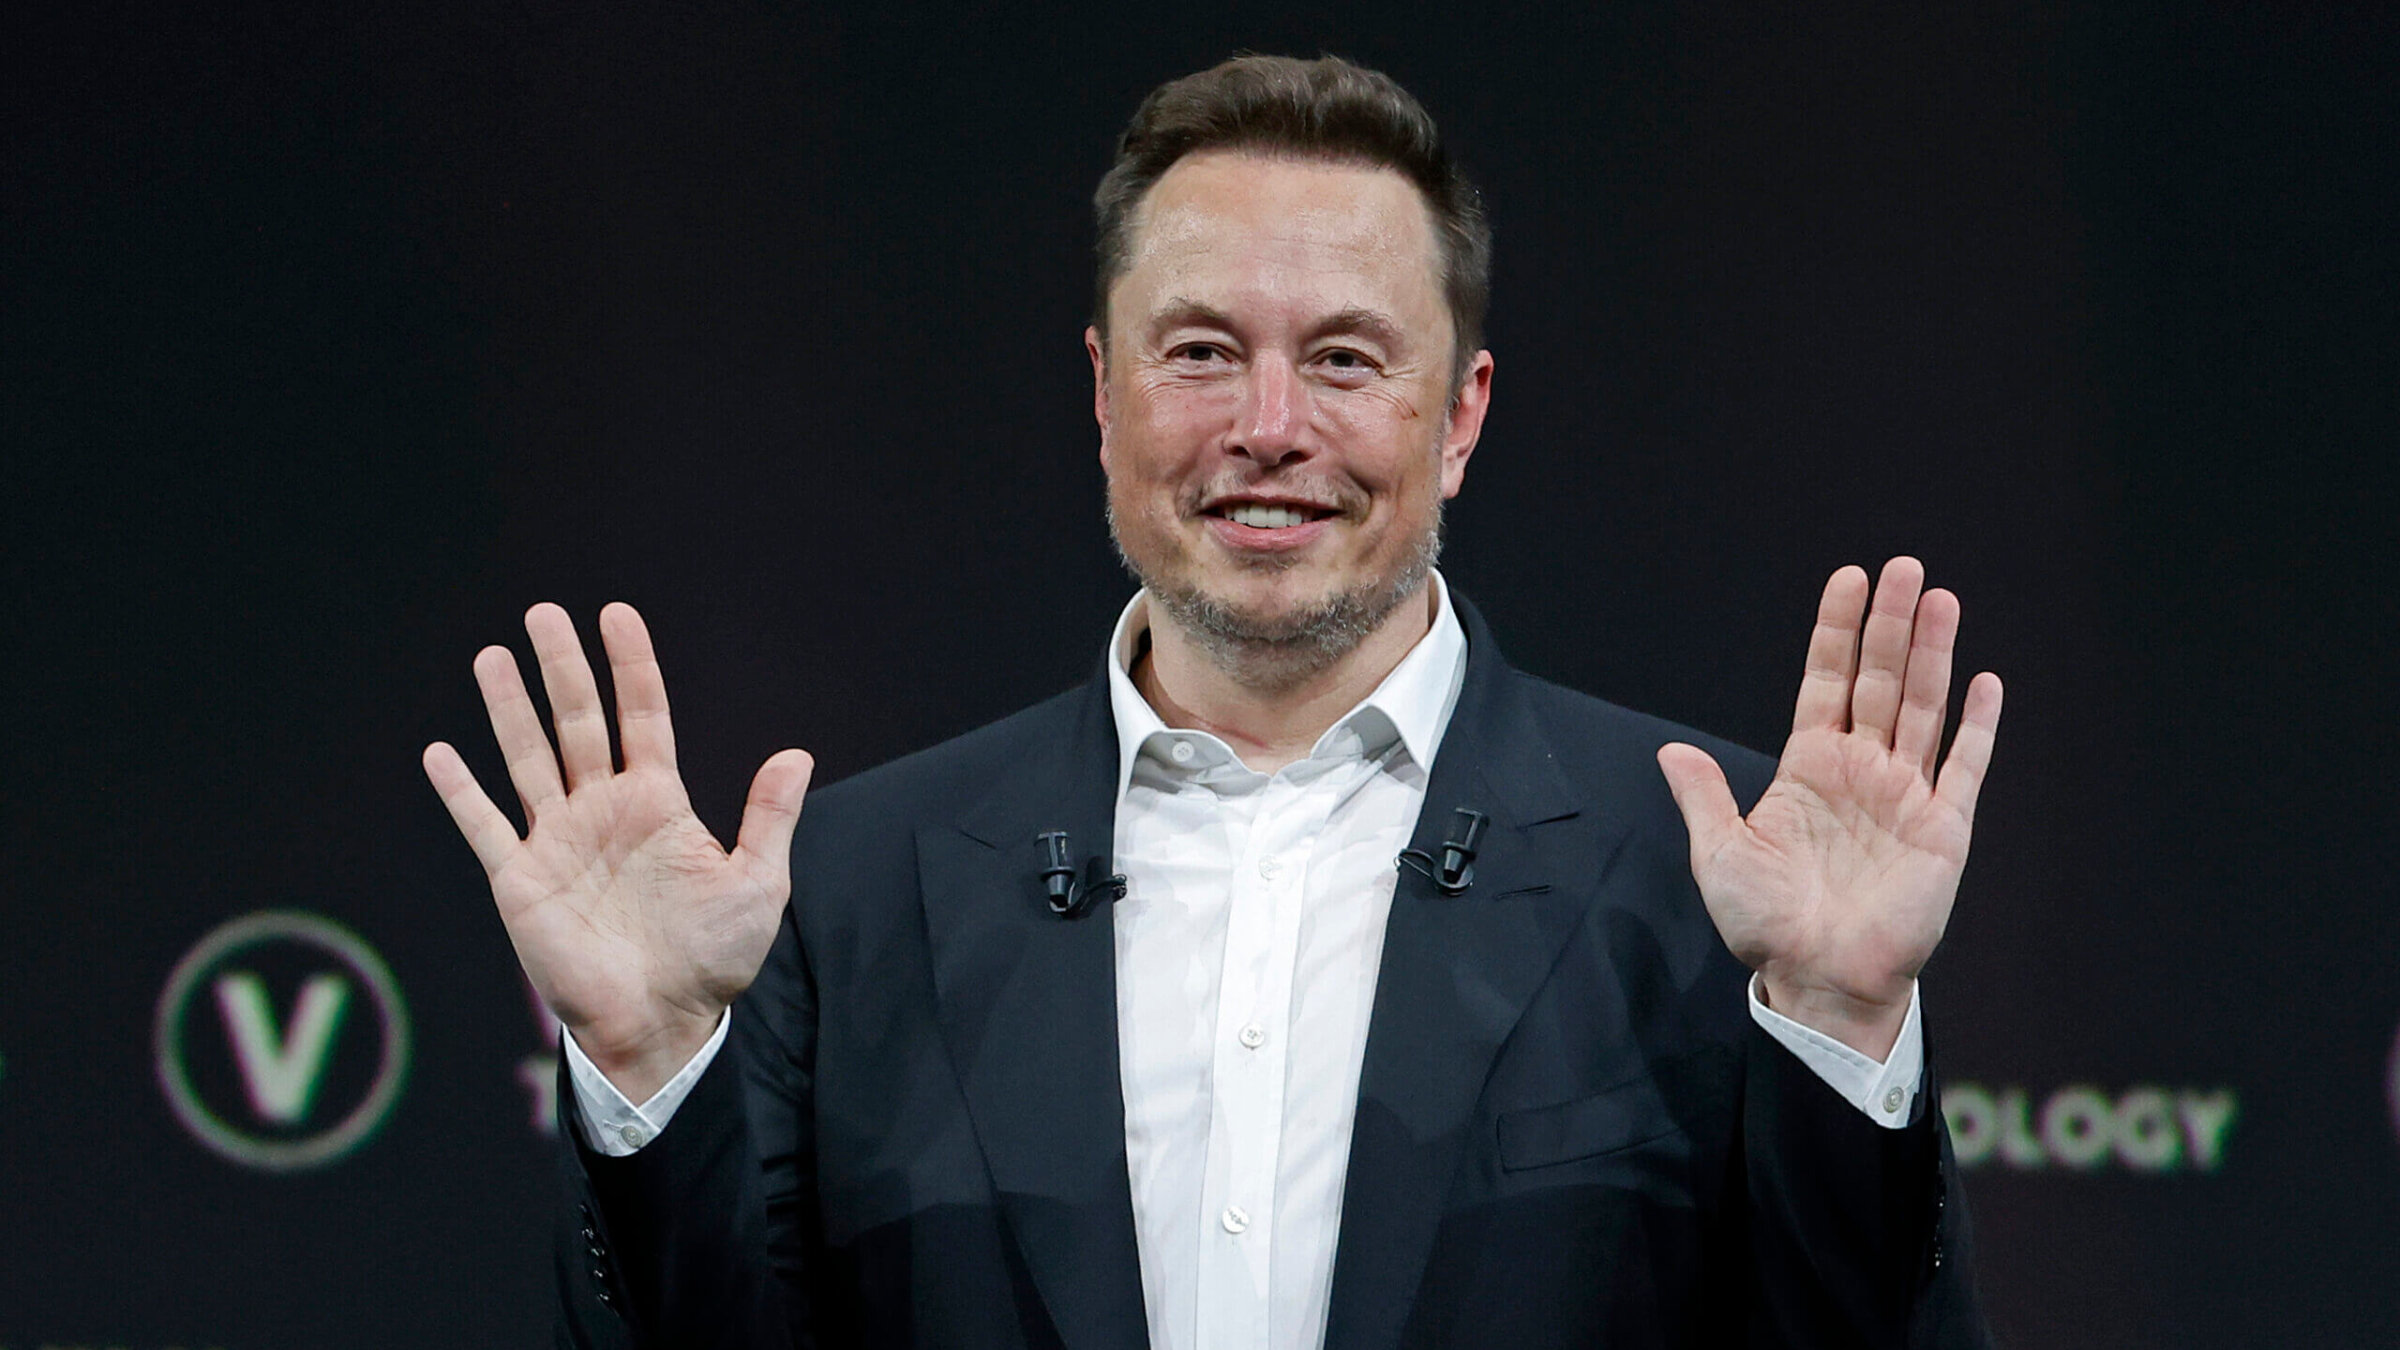 Chief Executive Officer of SpaceX and Tesla and owner of Twitter, Elon Musk gestures as he attends the Viva Technology conference dedicated to innovation and startups at the Porte de Versailles exhibition centre on June 16, 2023 in Paris, France. 